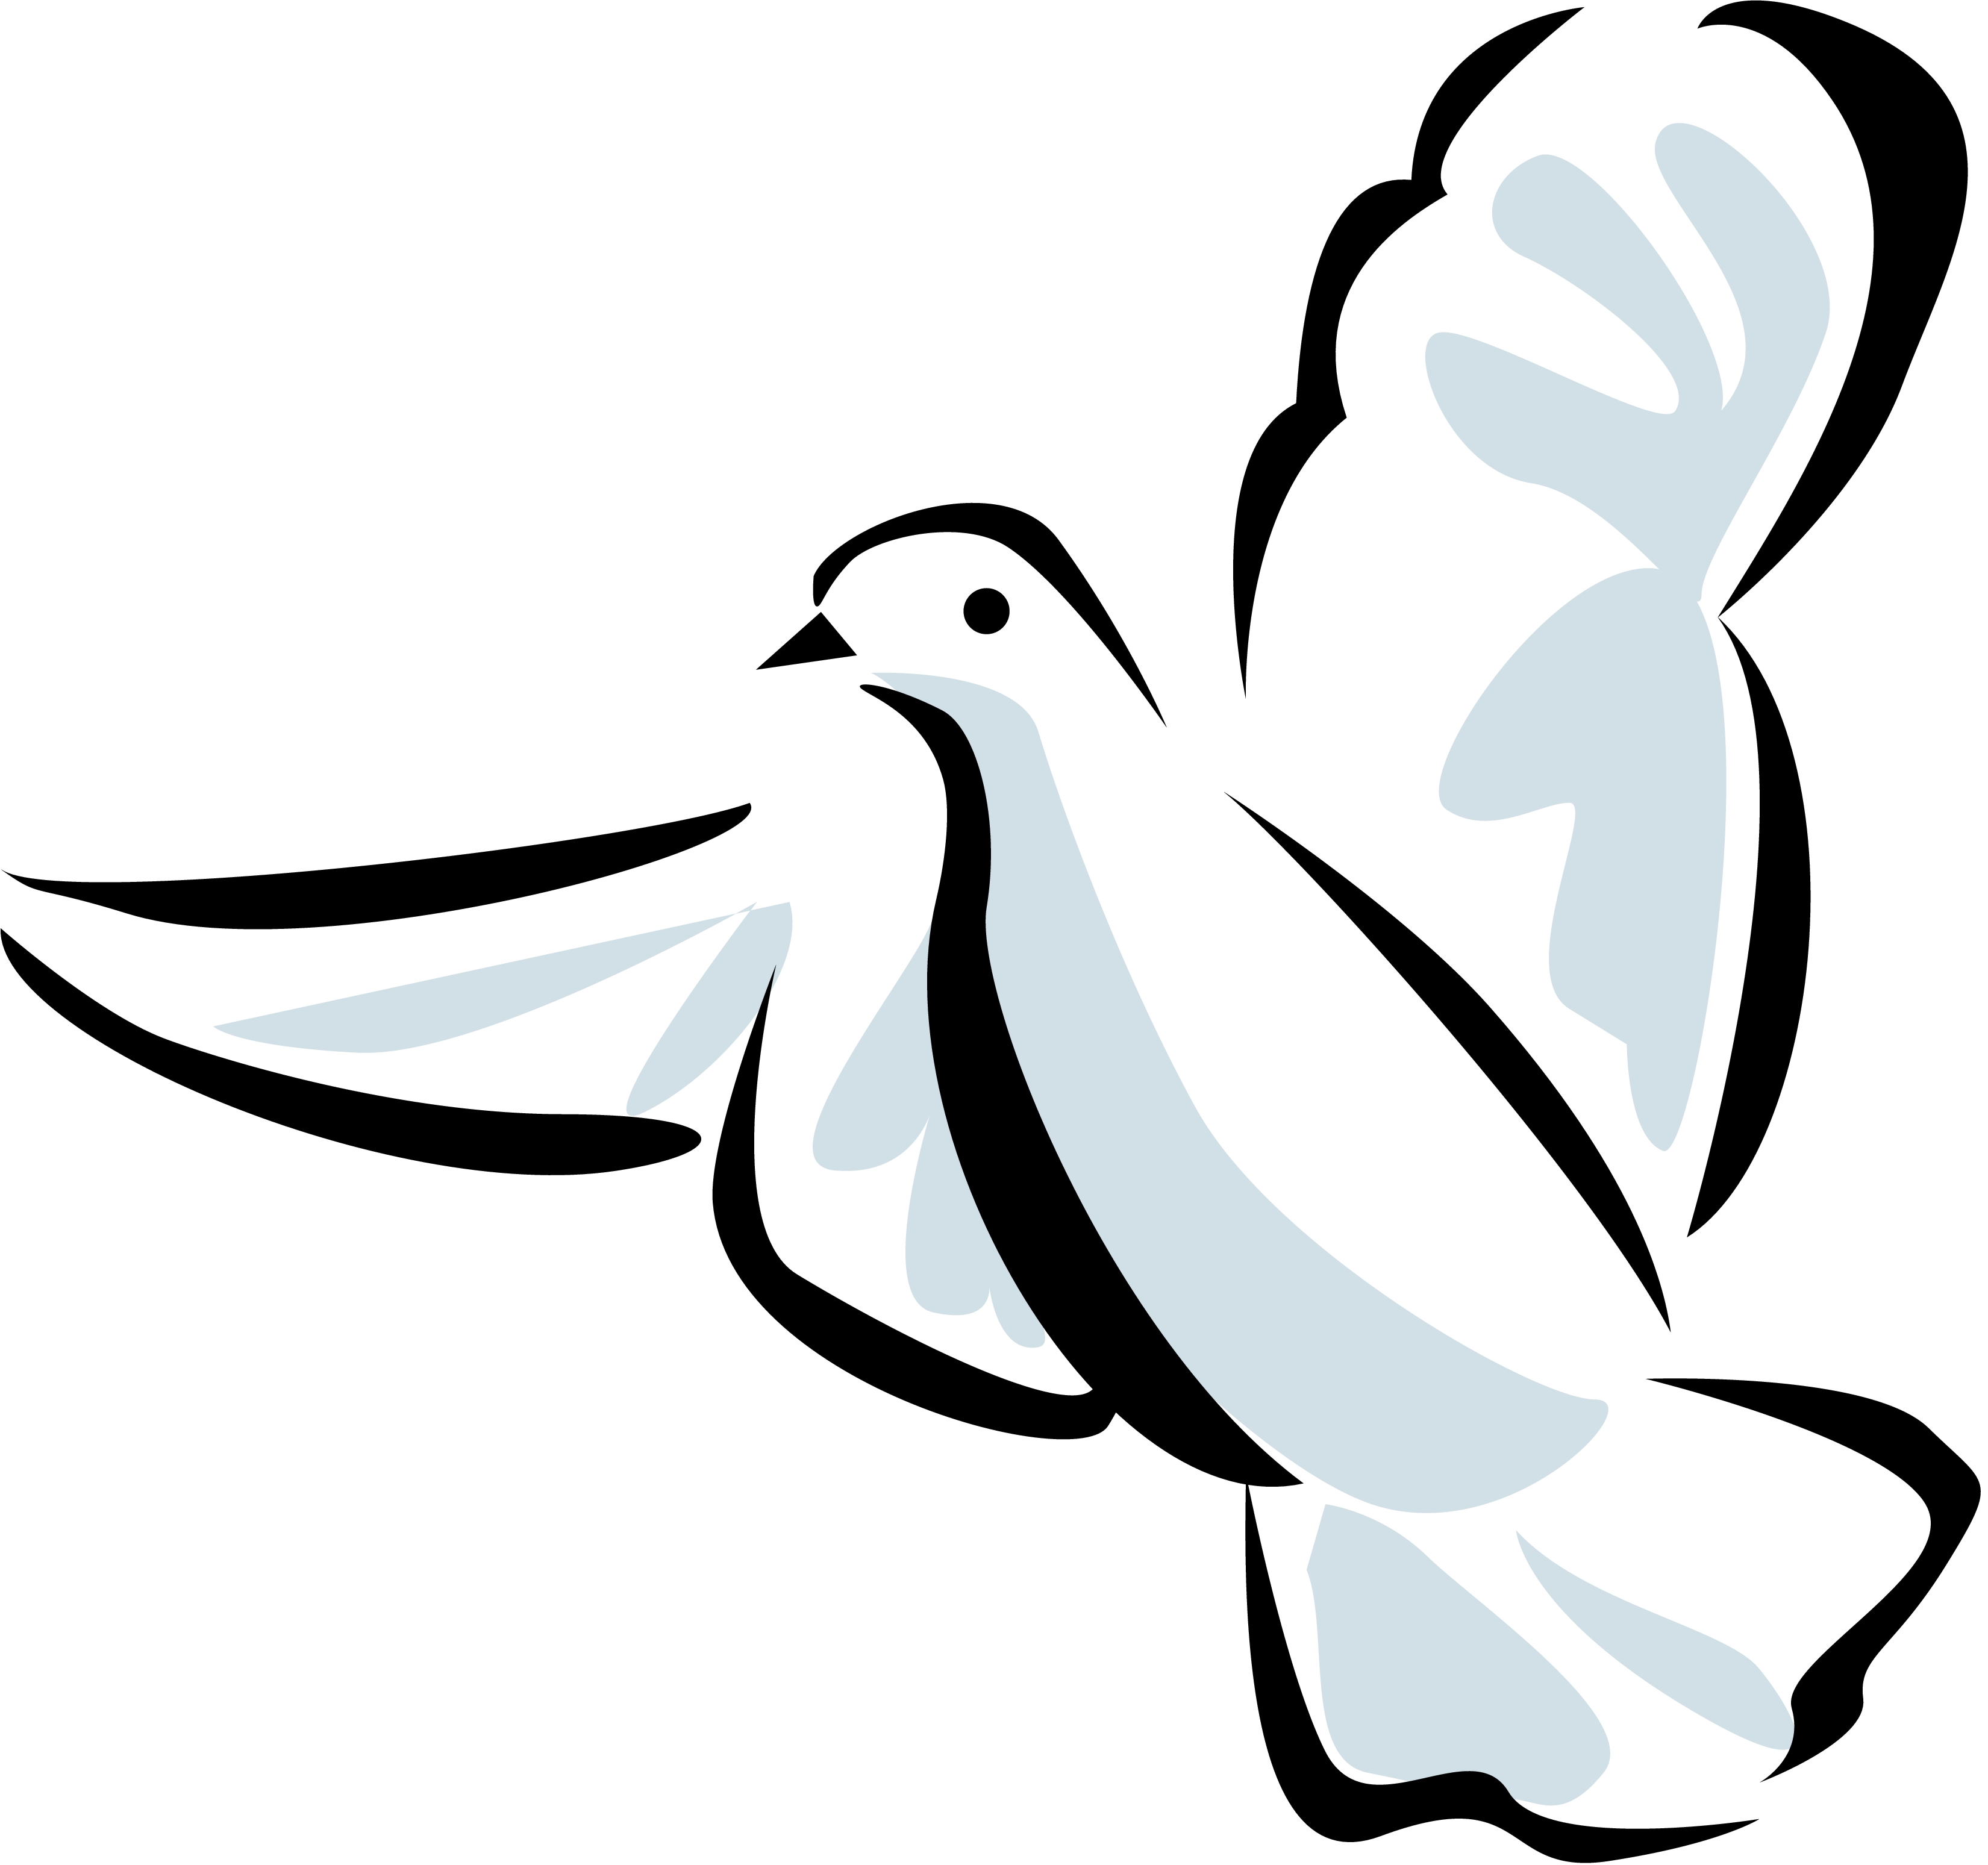 Holy Spirit Confirmation Clipart - ClipArt Best